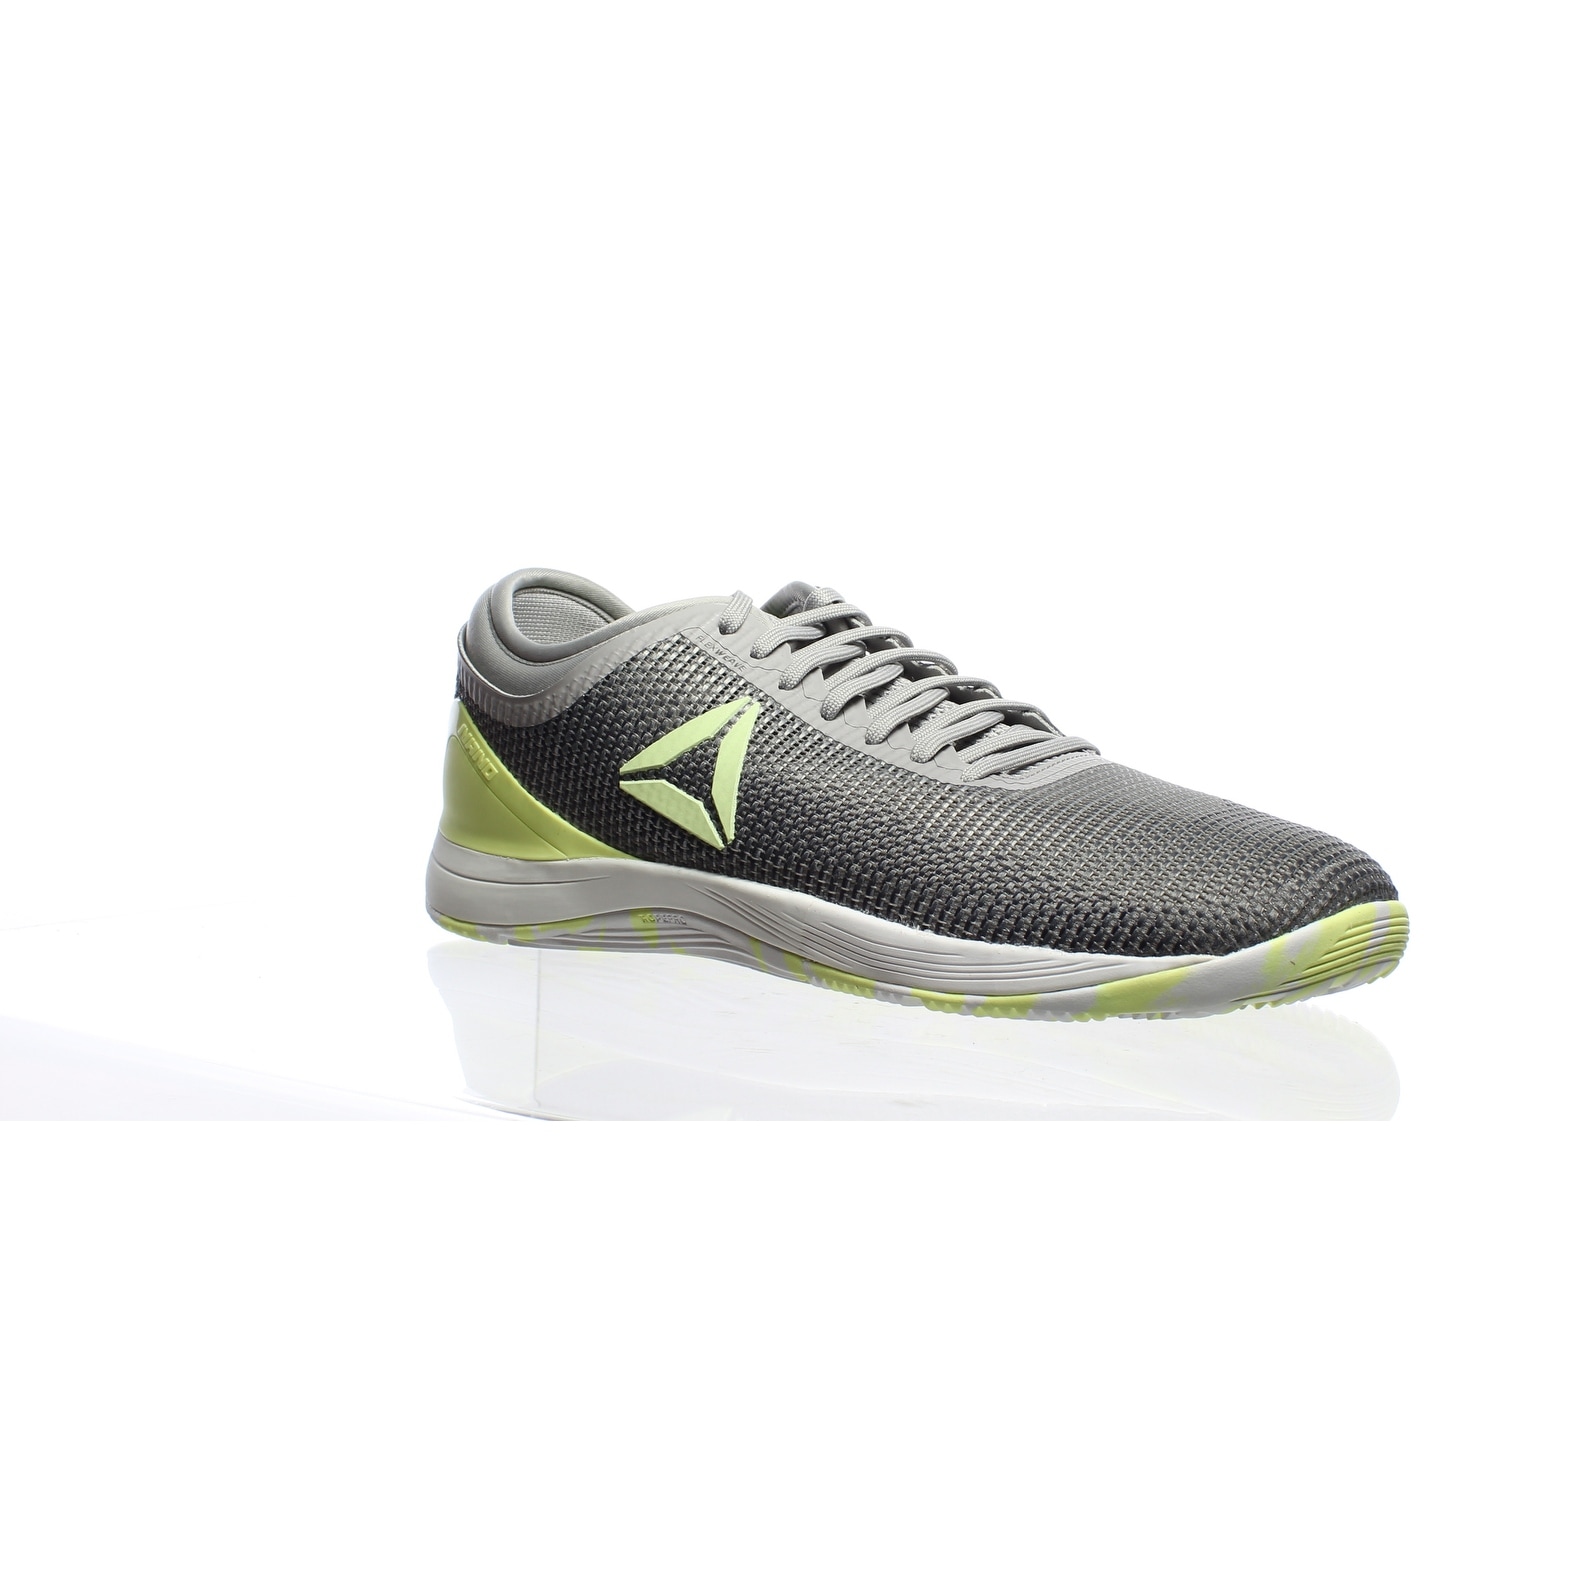 academy crossfit shoes